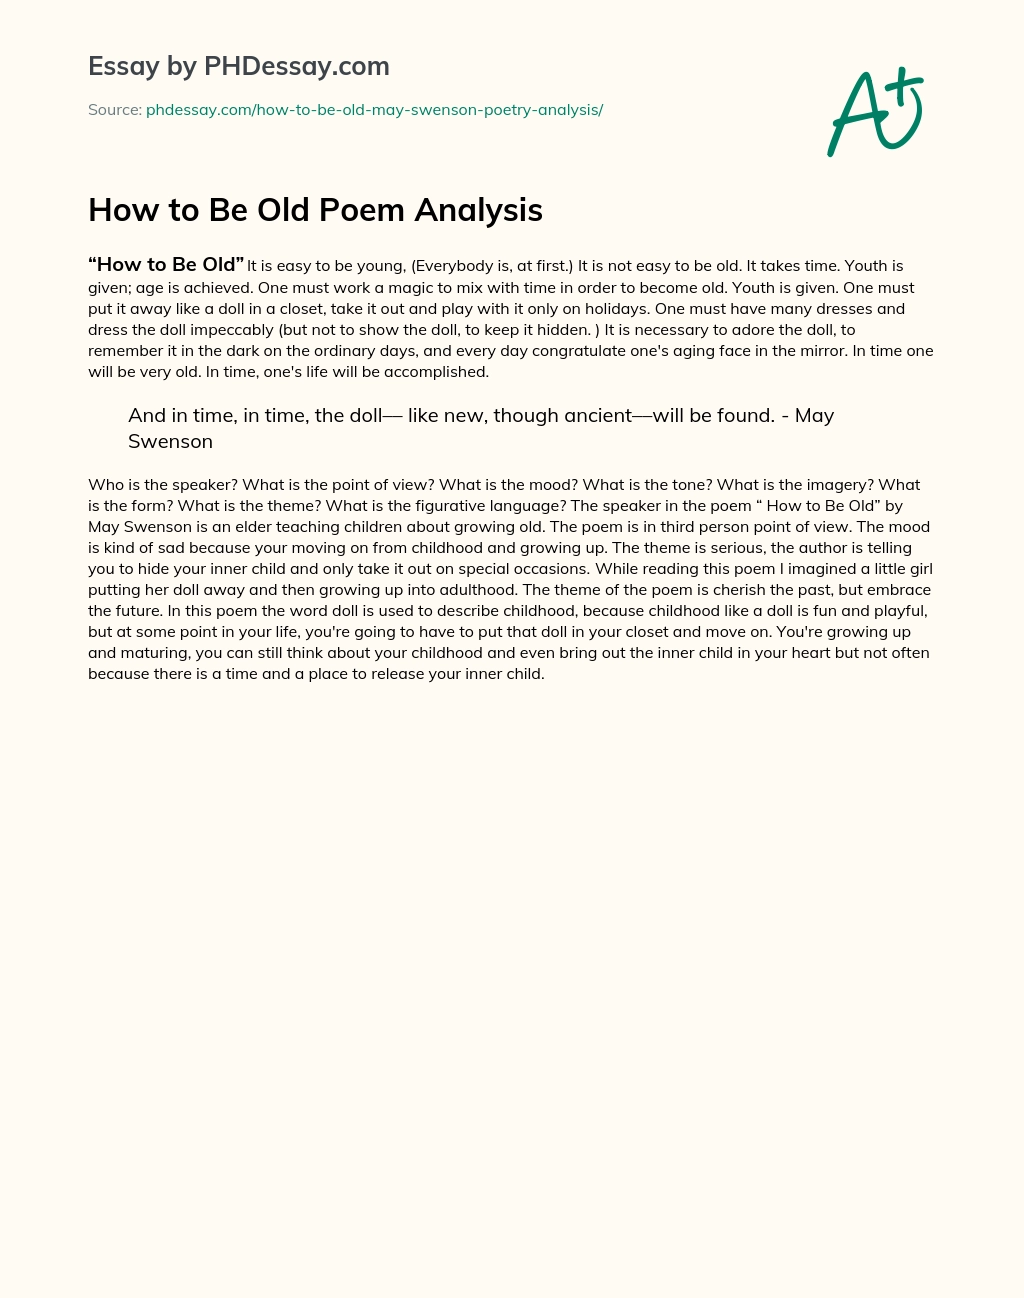 How to Be Old Poem Analysis essay